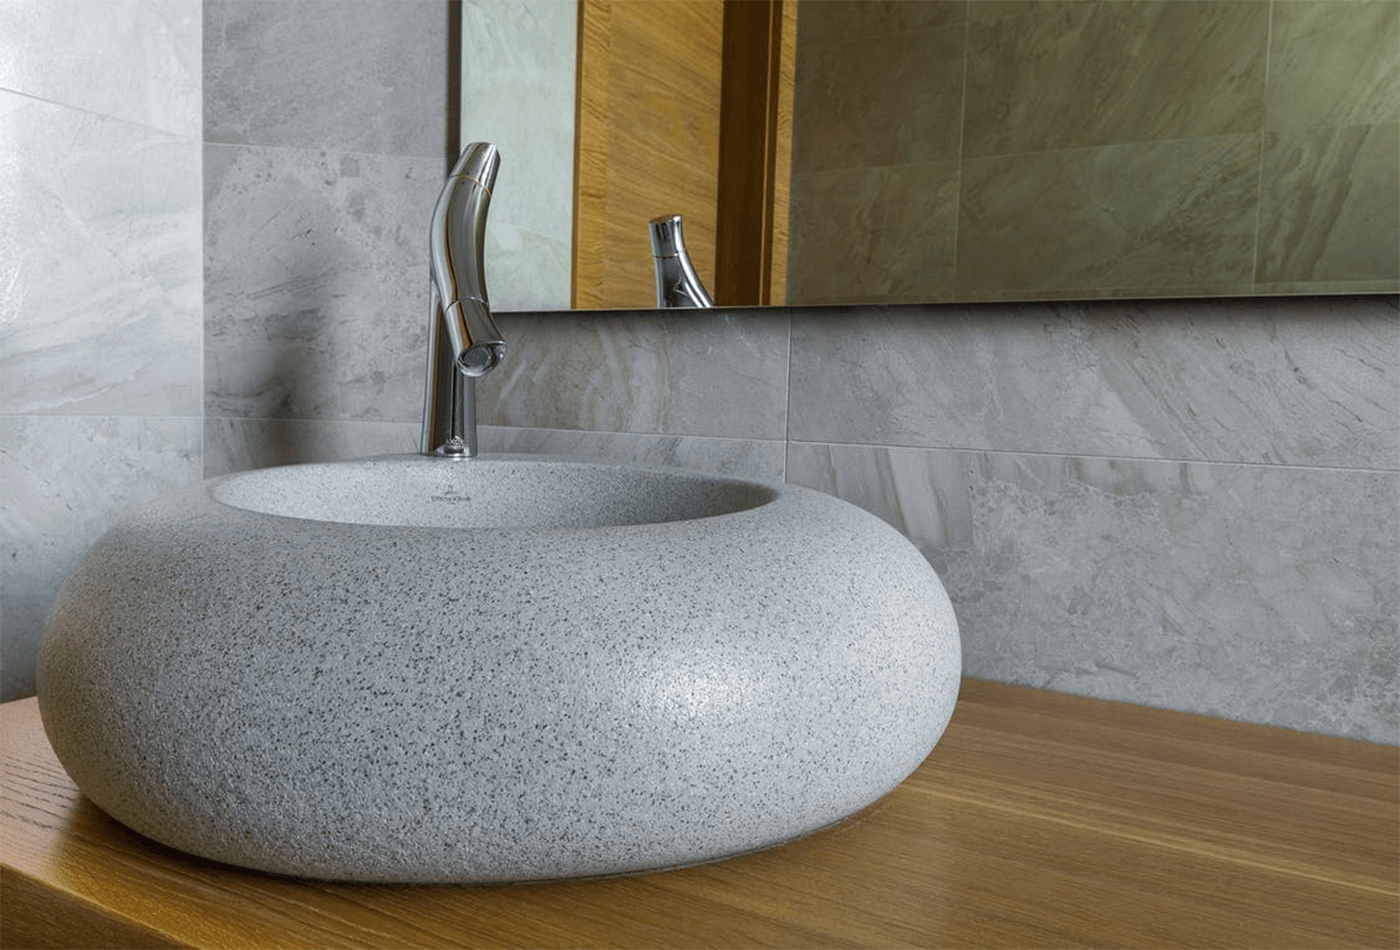 Stone Sink; Luxurious Natural Bathroom And Living Room Sink